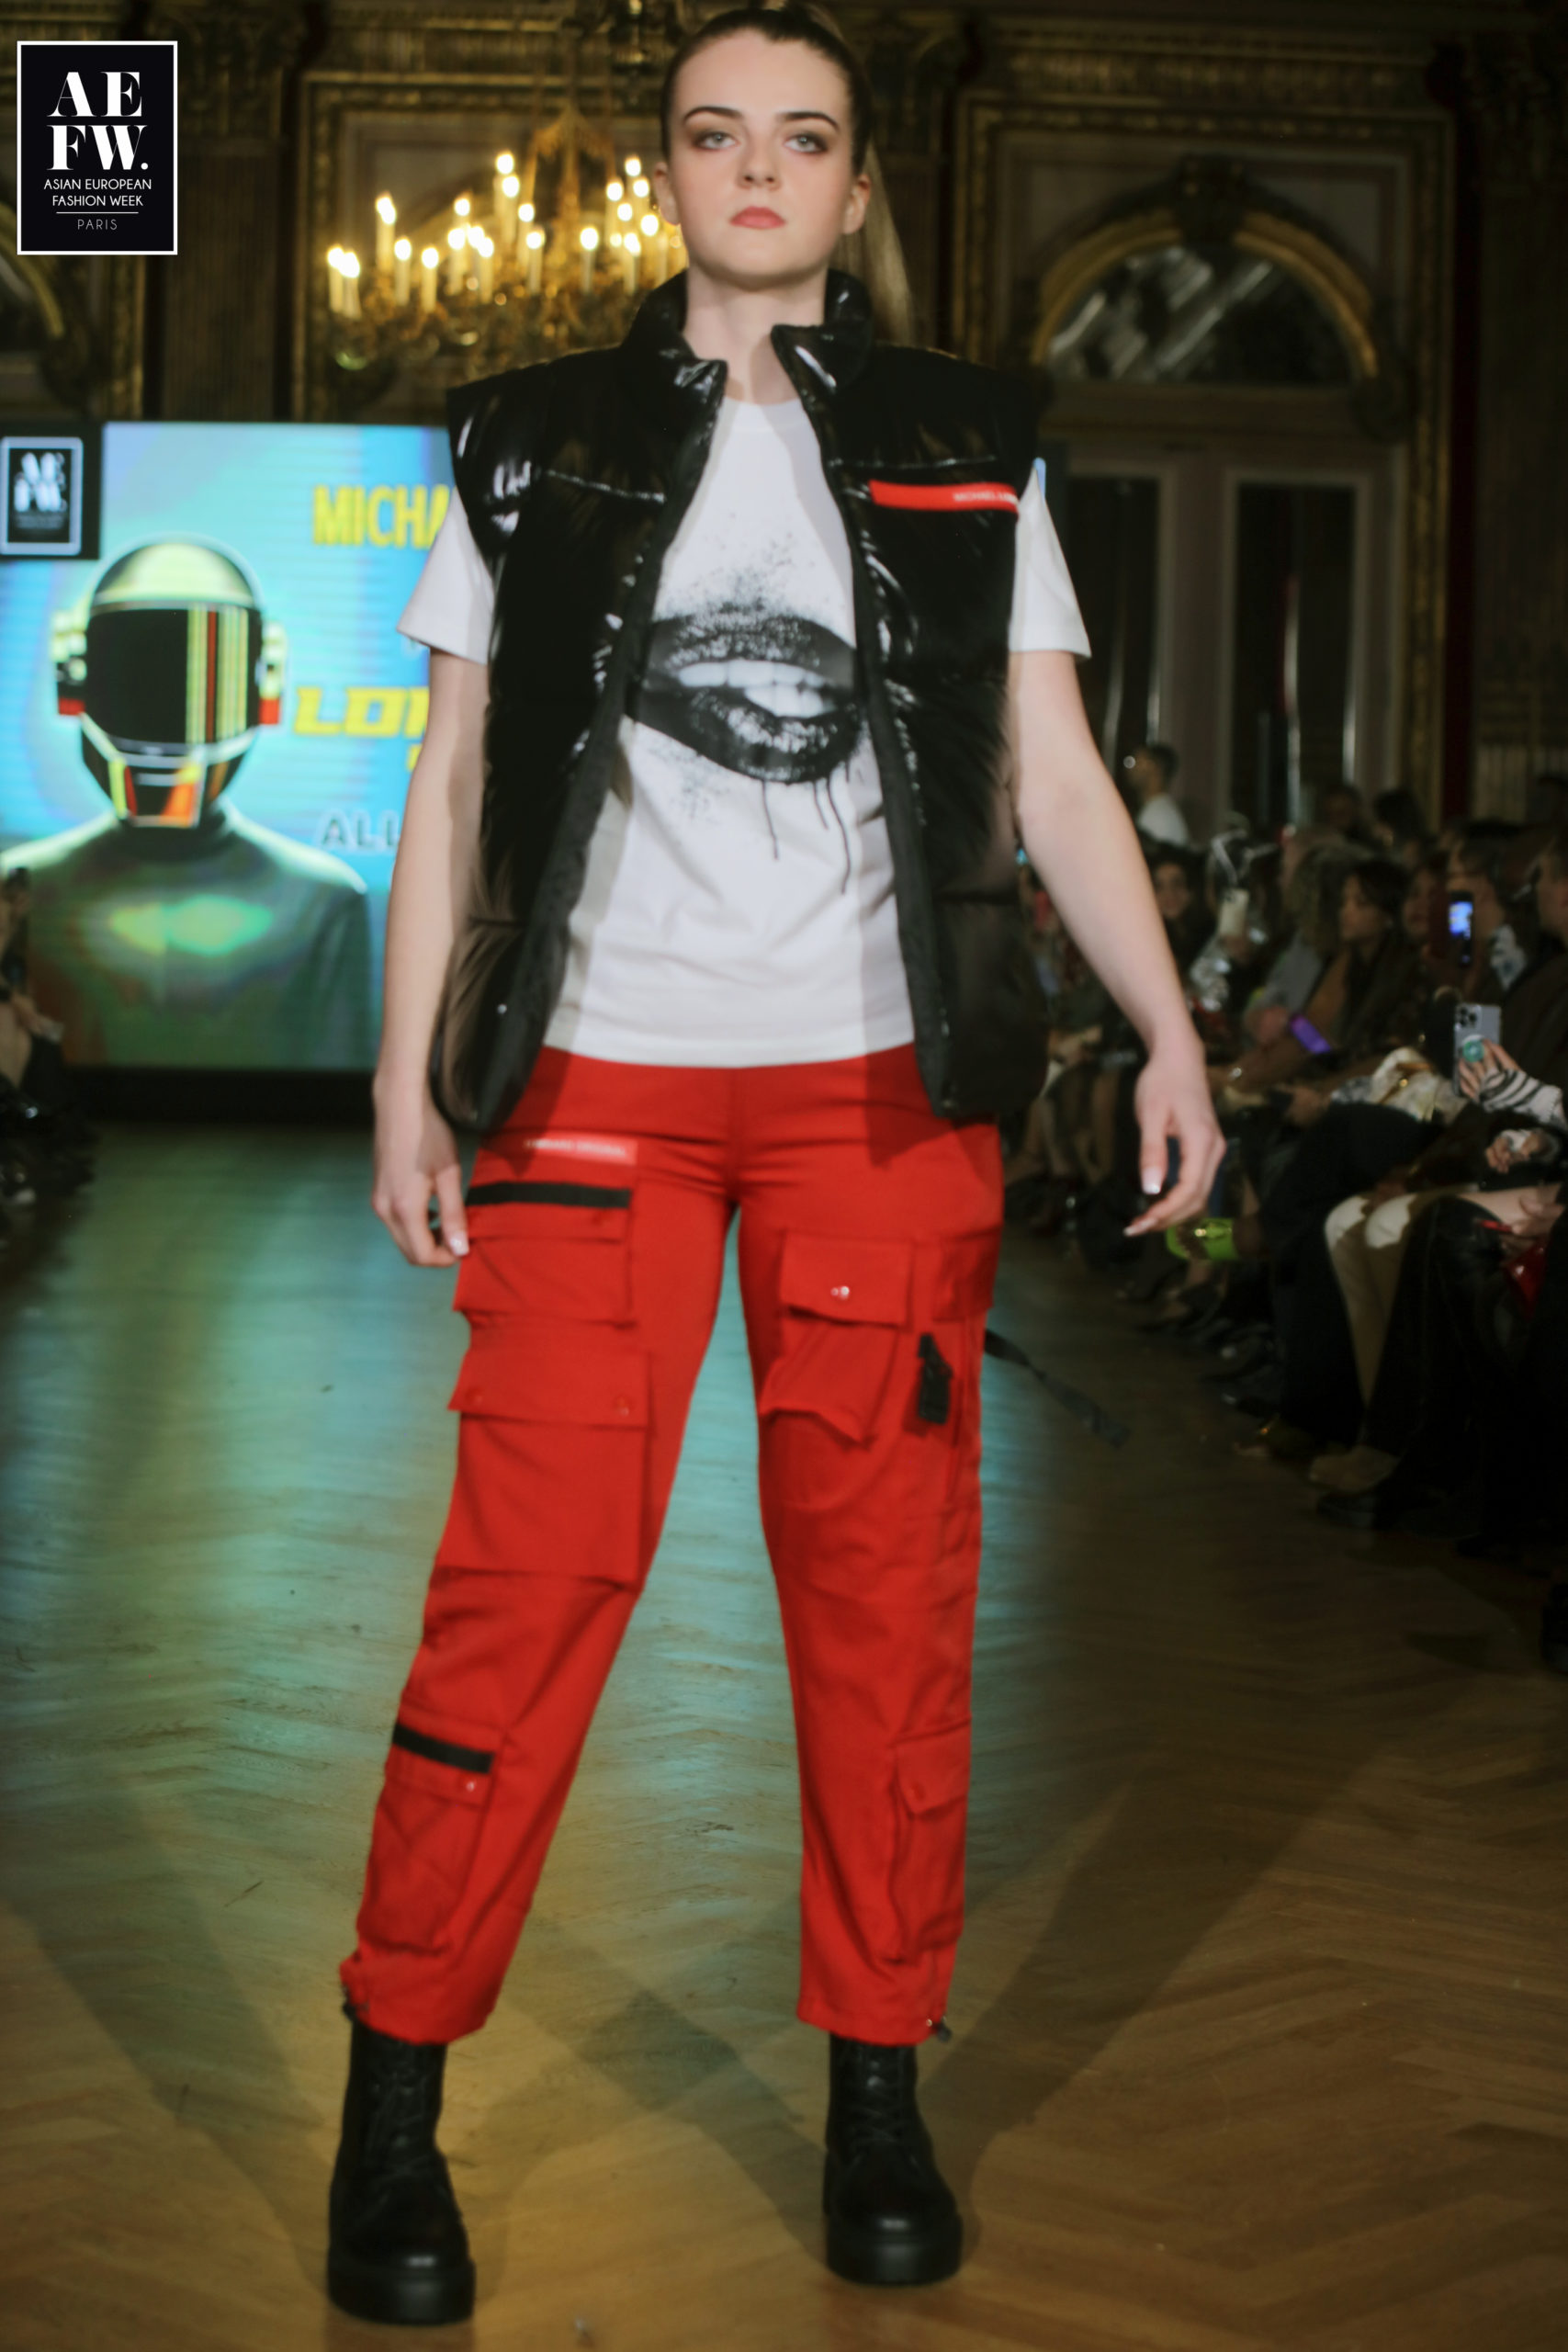 AEFW (Asian European Fashion Week - MICHAEL LOMBARD - ML SOLO PARIS - The King of Leather - PFW SS24  - WEST IN PARIS-VENDOME